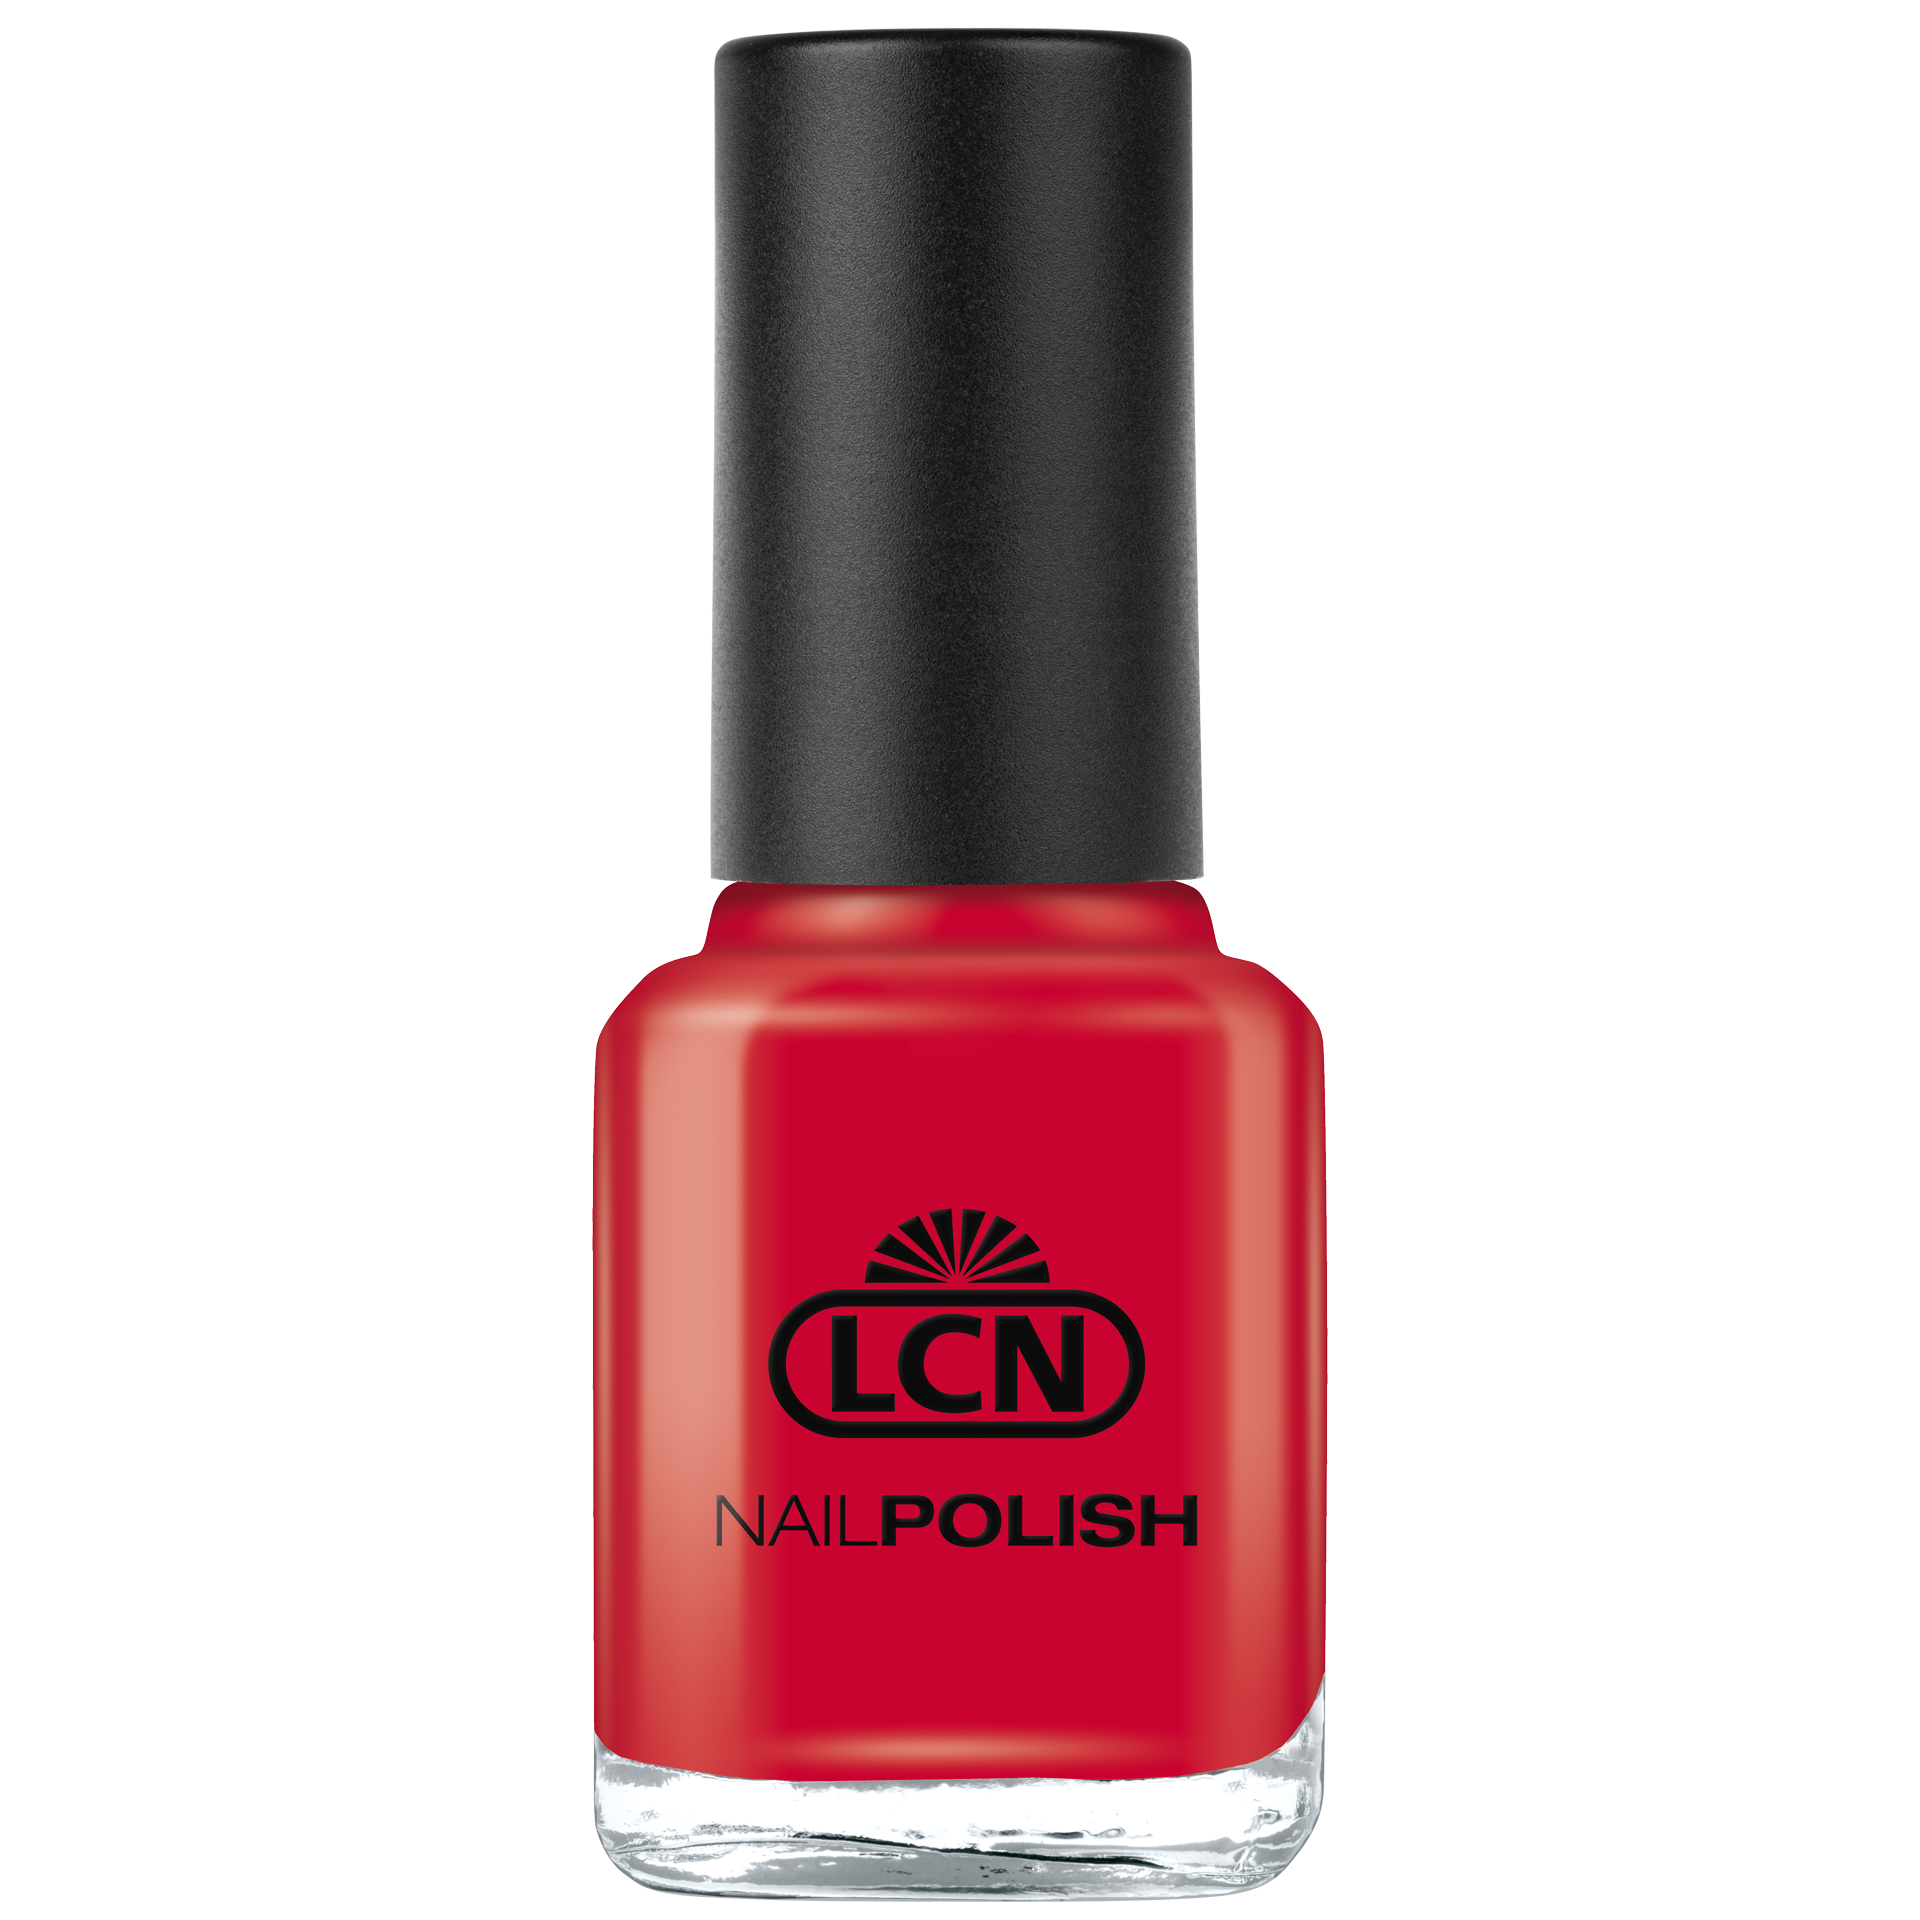 LCN Nail Polish 8ml, (656M) after hours